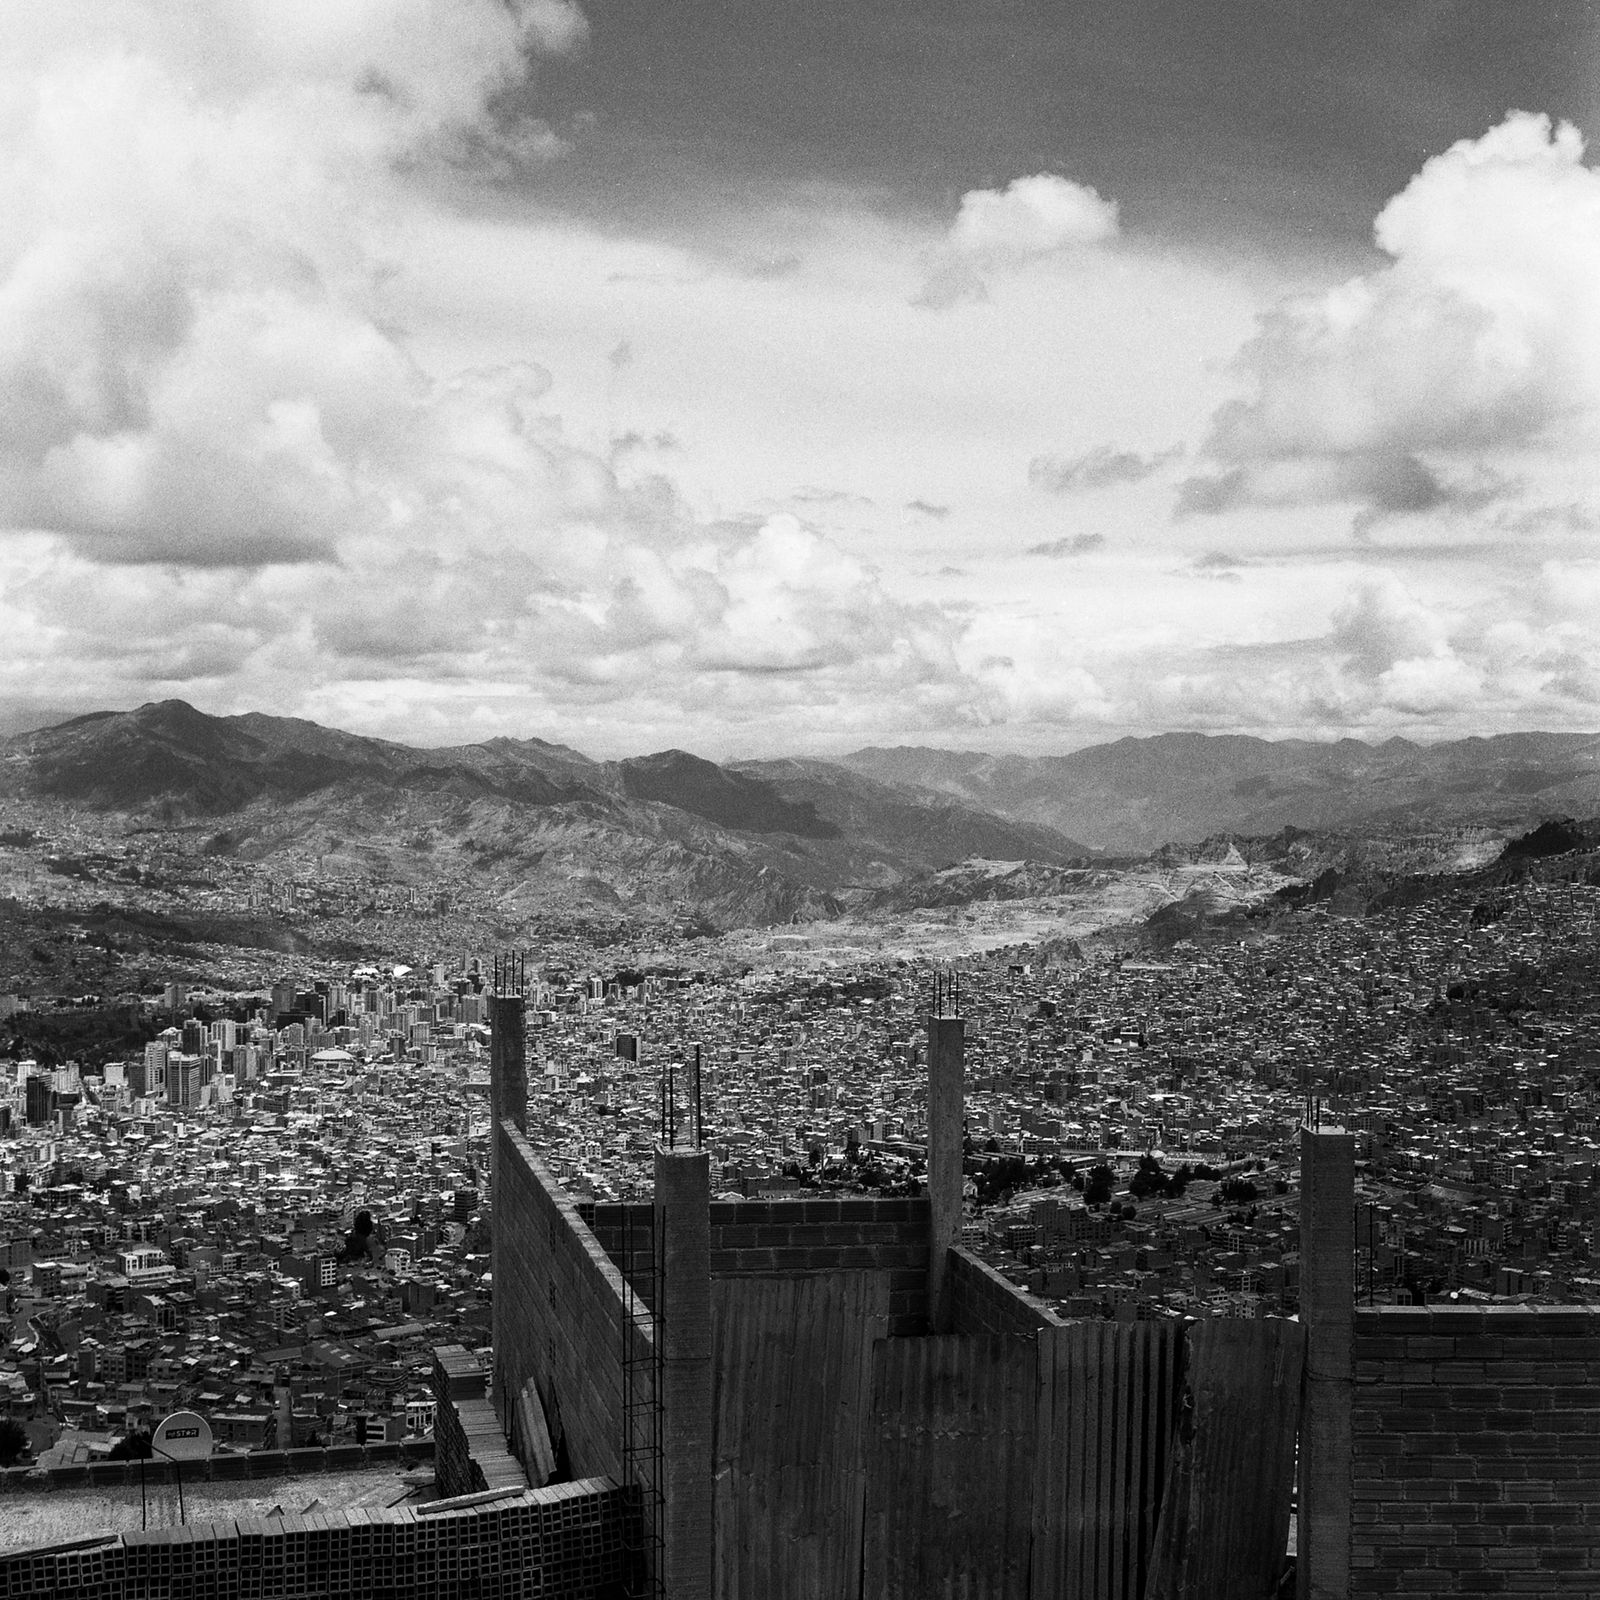 © Sofia Bensadon - Image from the "50 kg" - Woman Builders in La Paz City, Bolivia photography project